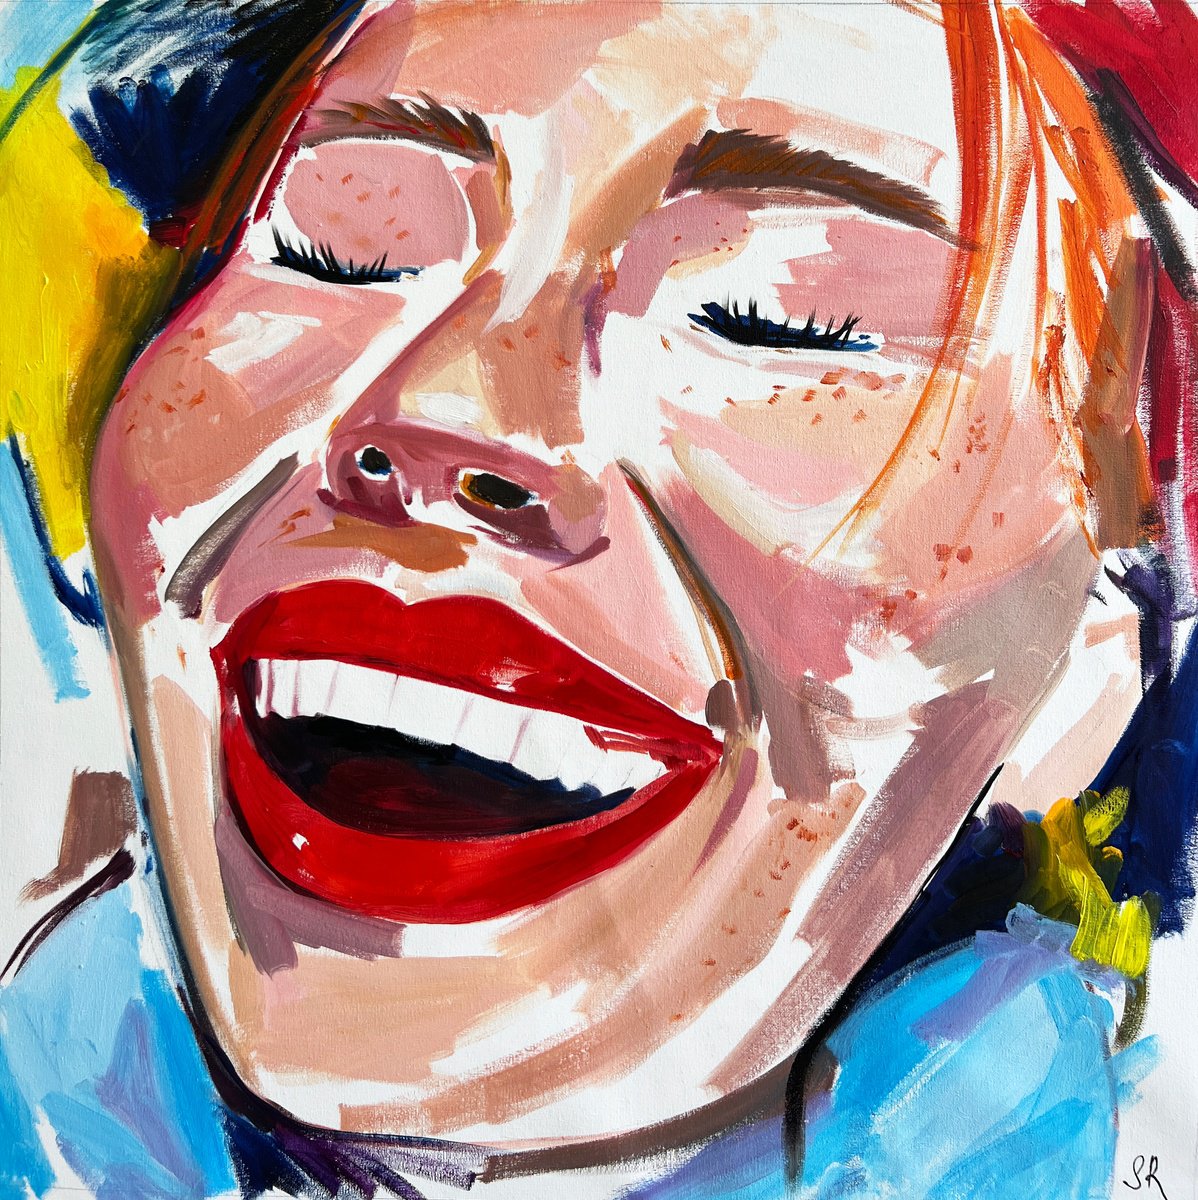 GINGER WOMAN SMILING - large oil painting, red, yellow and blue by Sasha Robinson